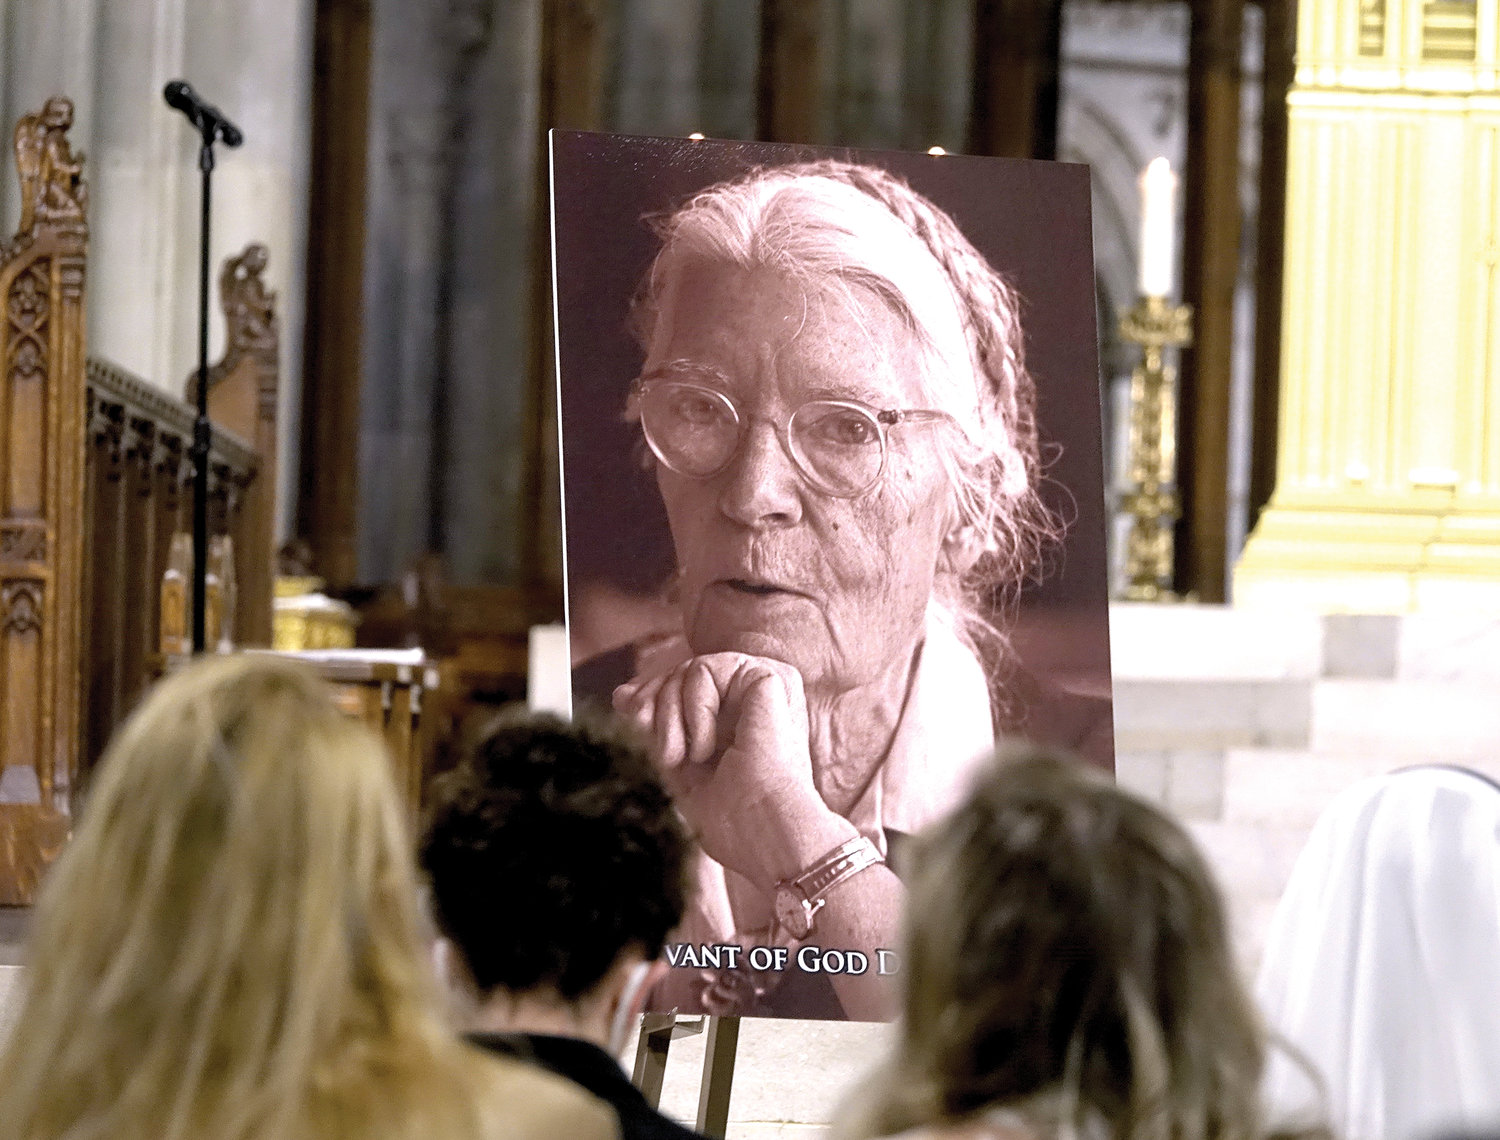 SAINTLY COUNTENANCE—A portrait photo of Dorothy Day occupies a prominent spot in the sanctuary at St. Patrick’s Cathedral Nov. 29, the first Sunday of Advent and the 40th anniversary of her death.